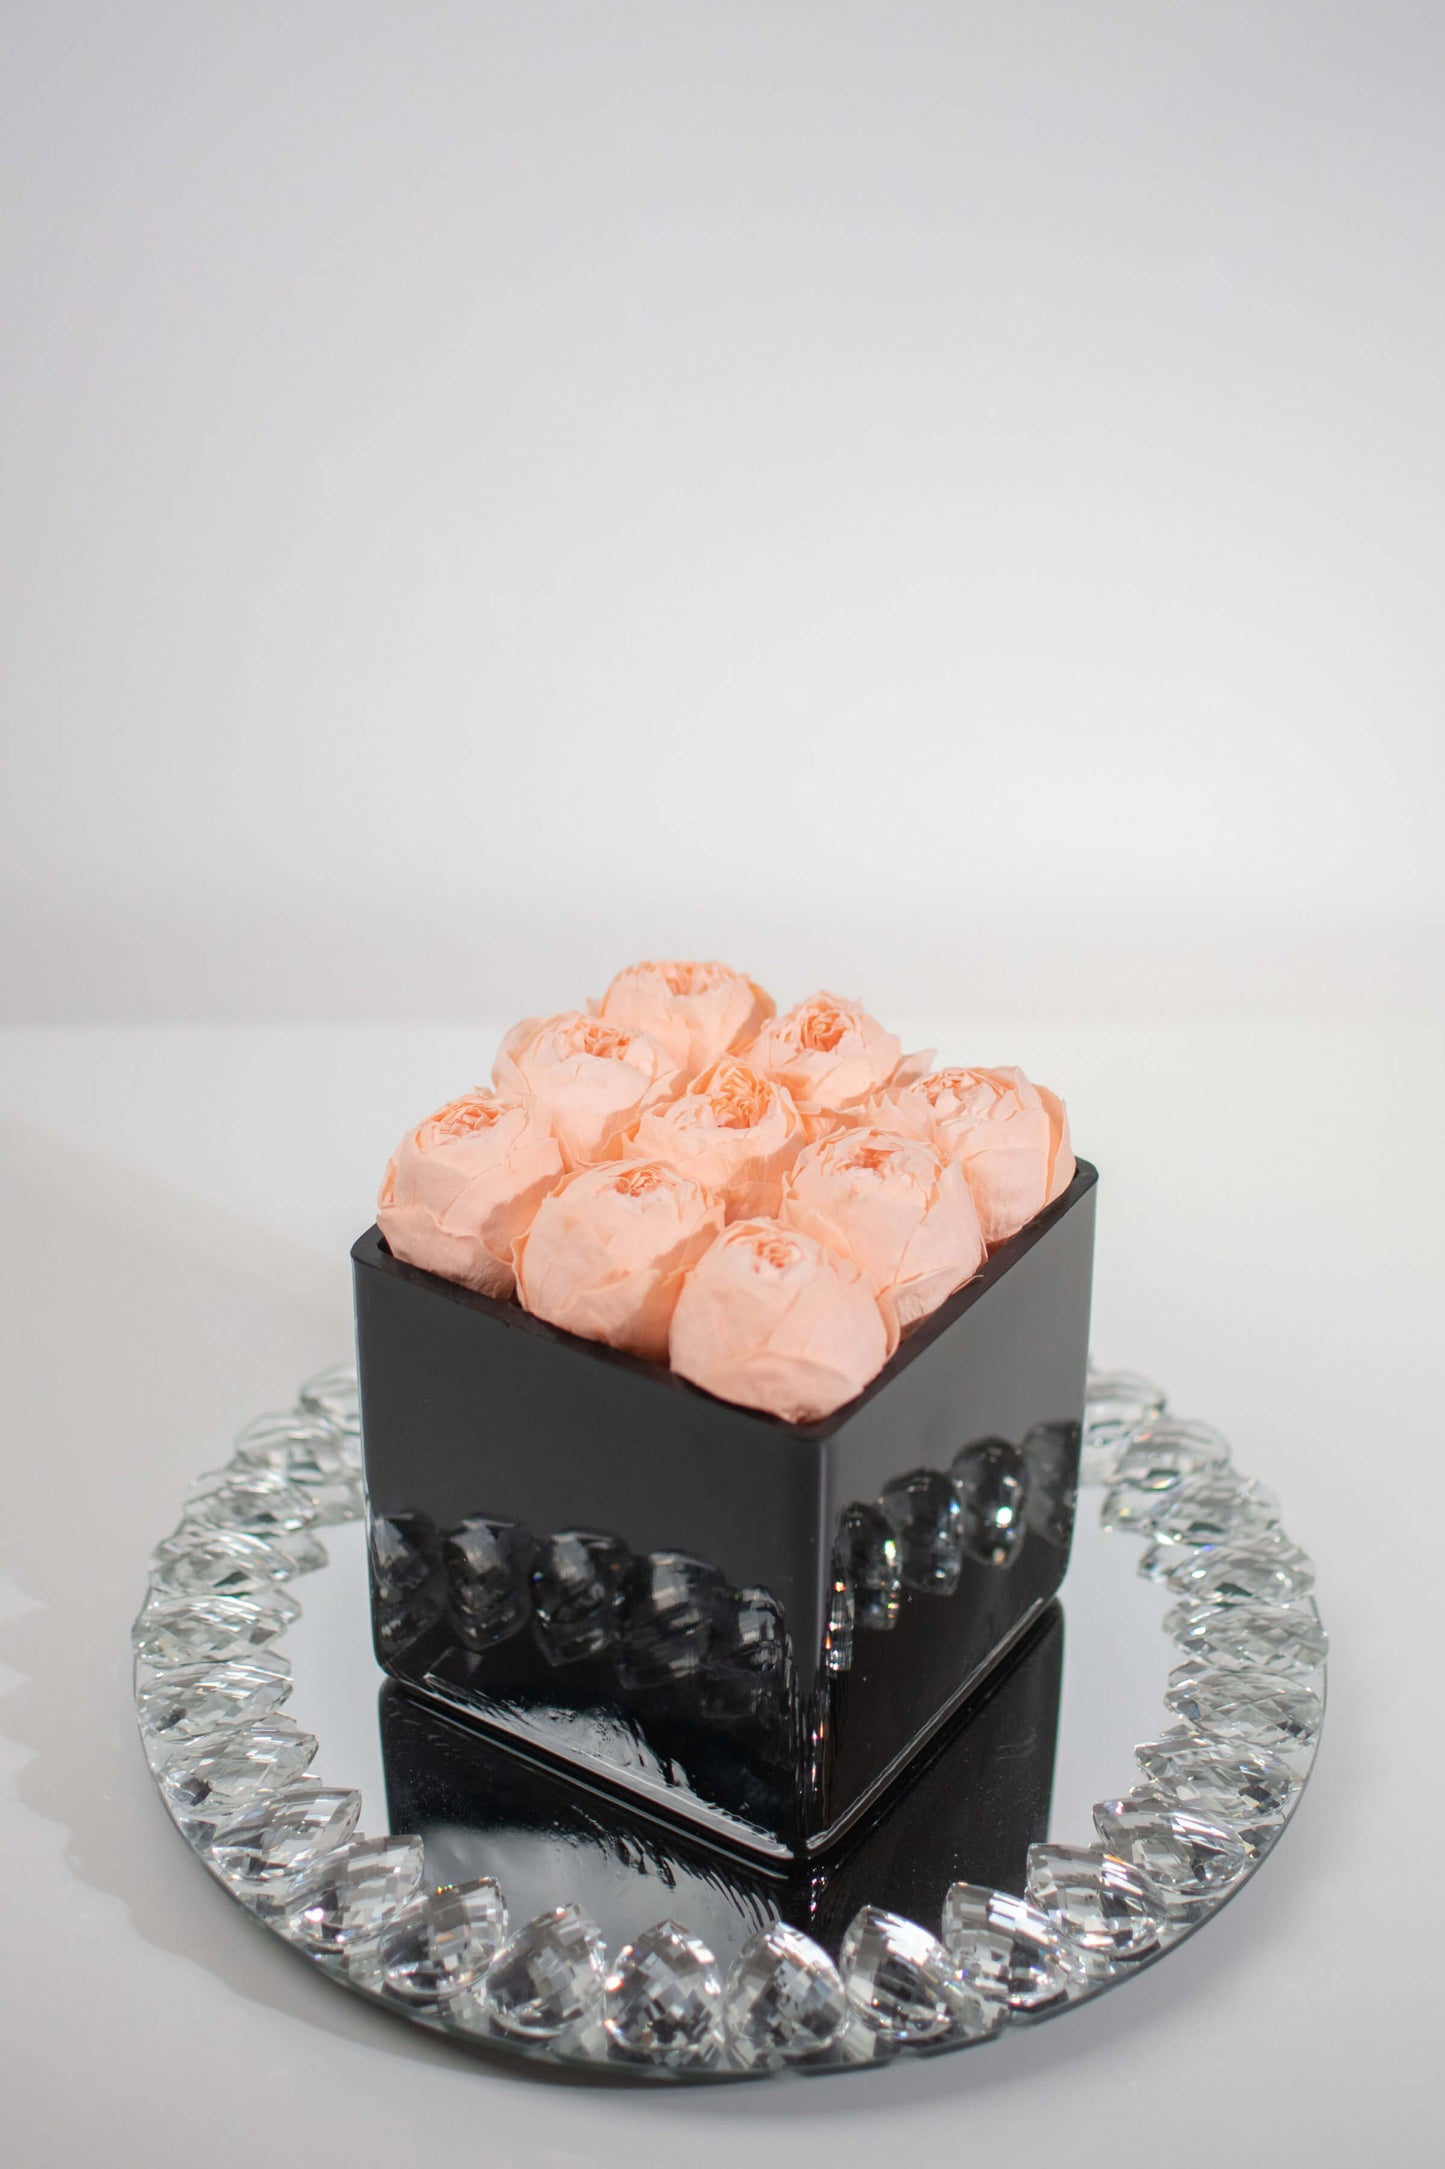 SQUARE BLACK GLASS VASE WITH PRESERVED PEACH PEONIES